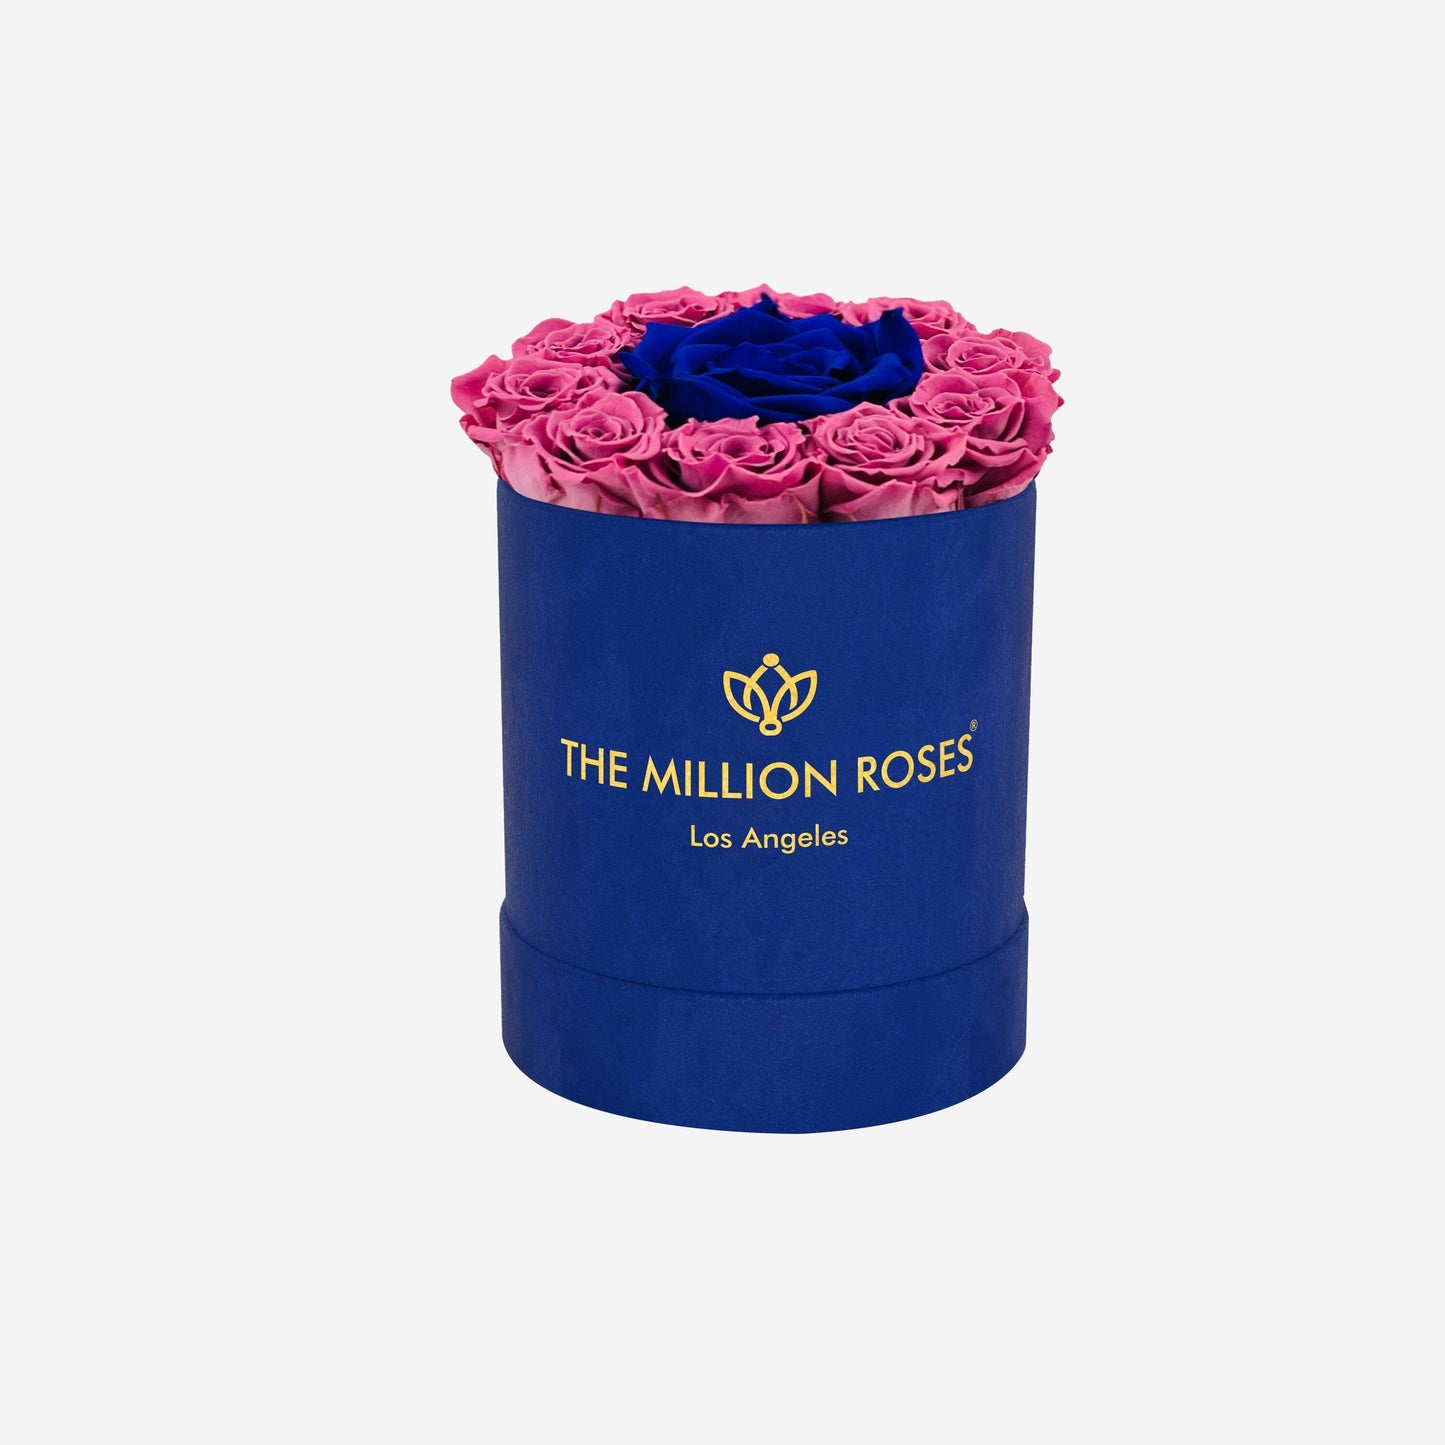 Basic Royal Blue Suede Box | Orchid & Royal Blue Mini Roses - The Million Roses